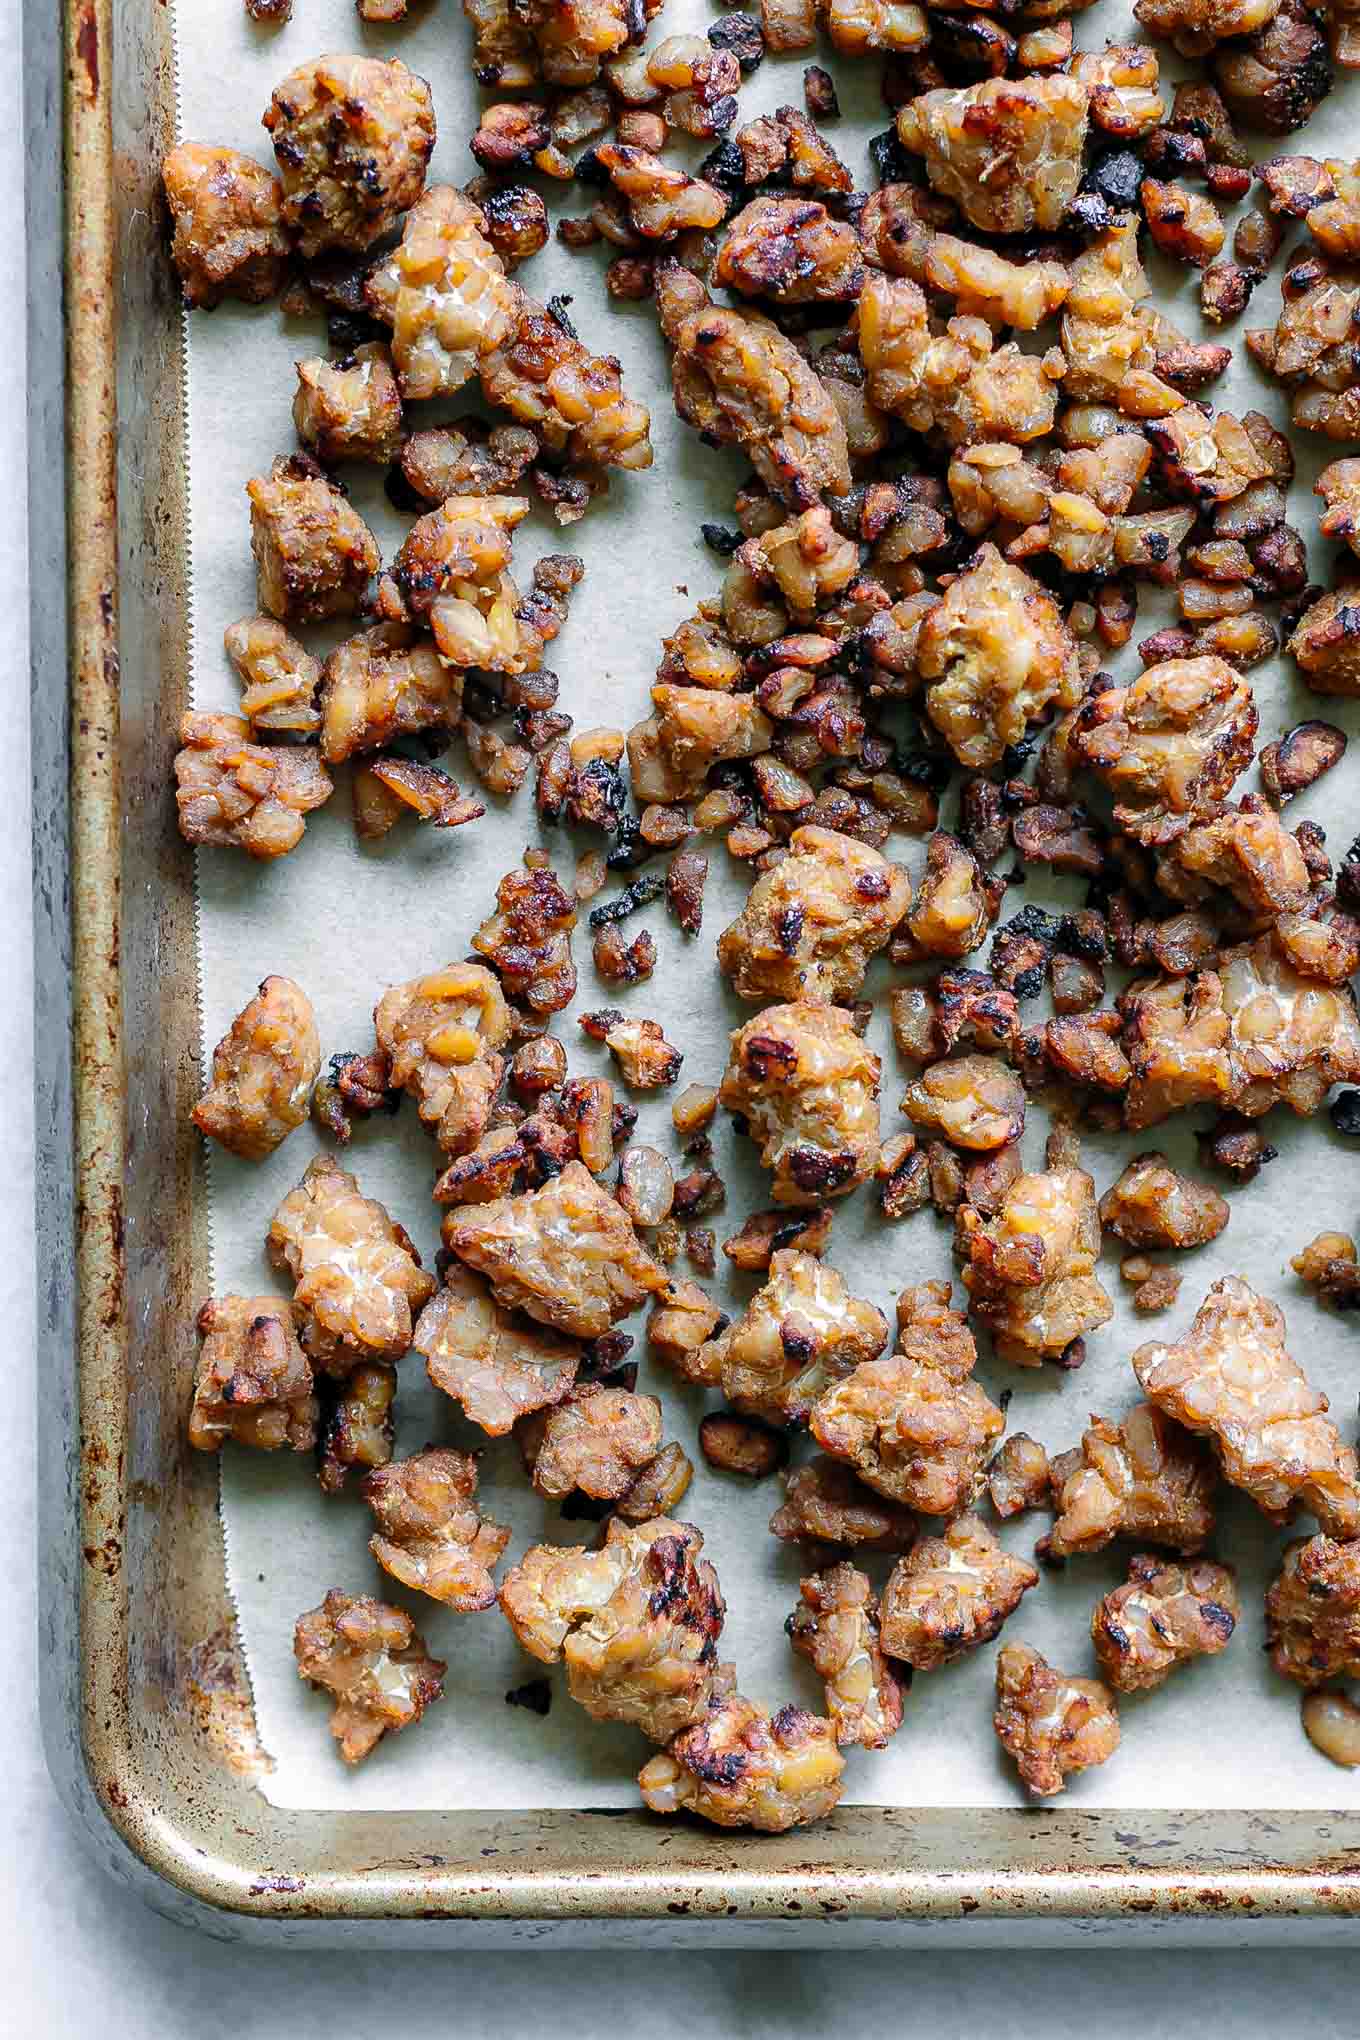 baked crispy tempeh on a baking sheet after roasting